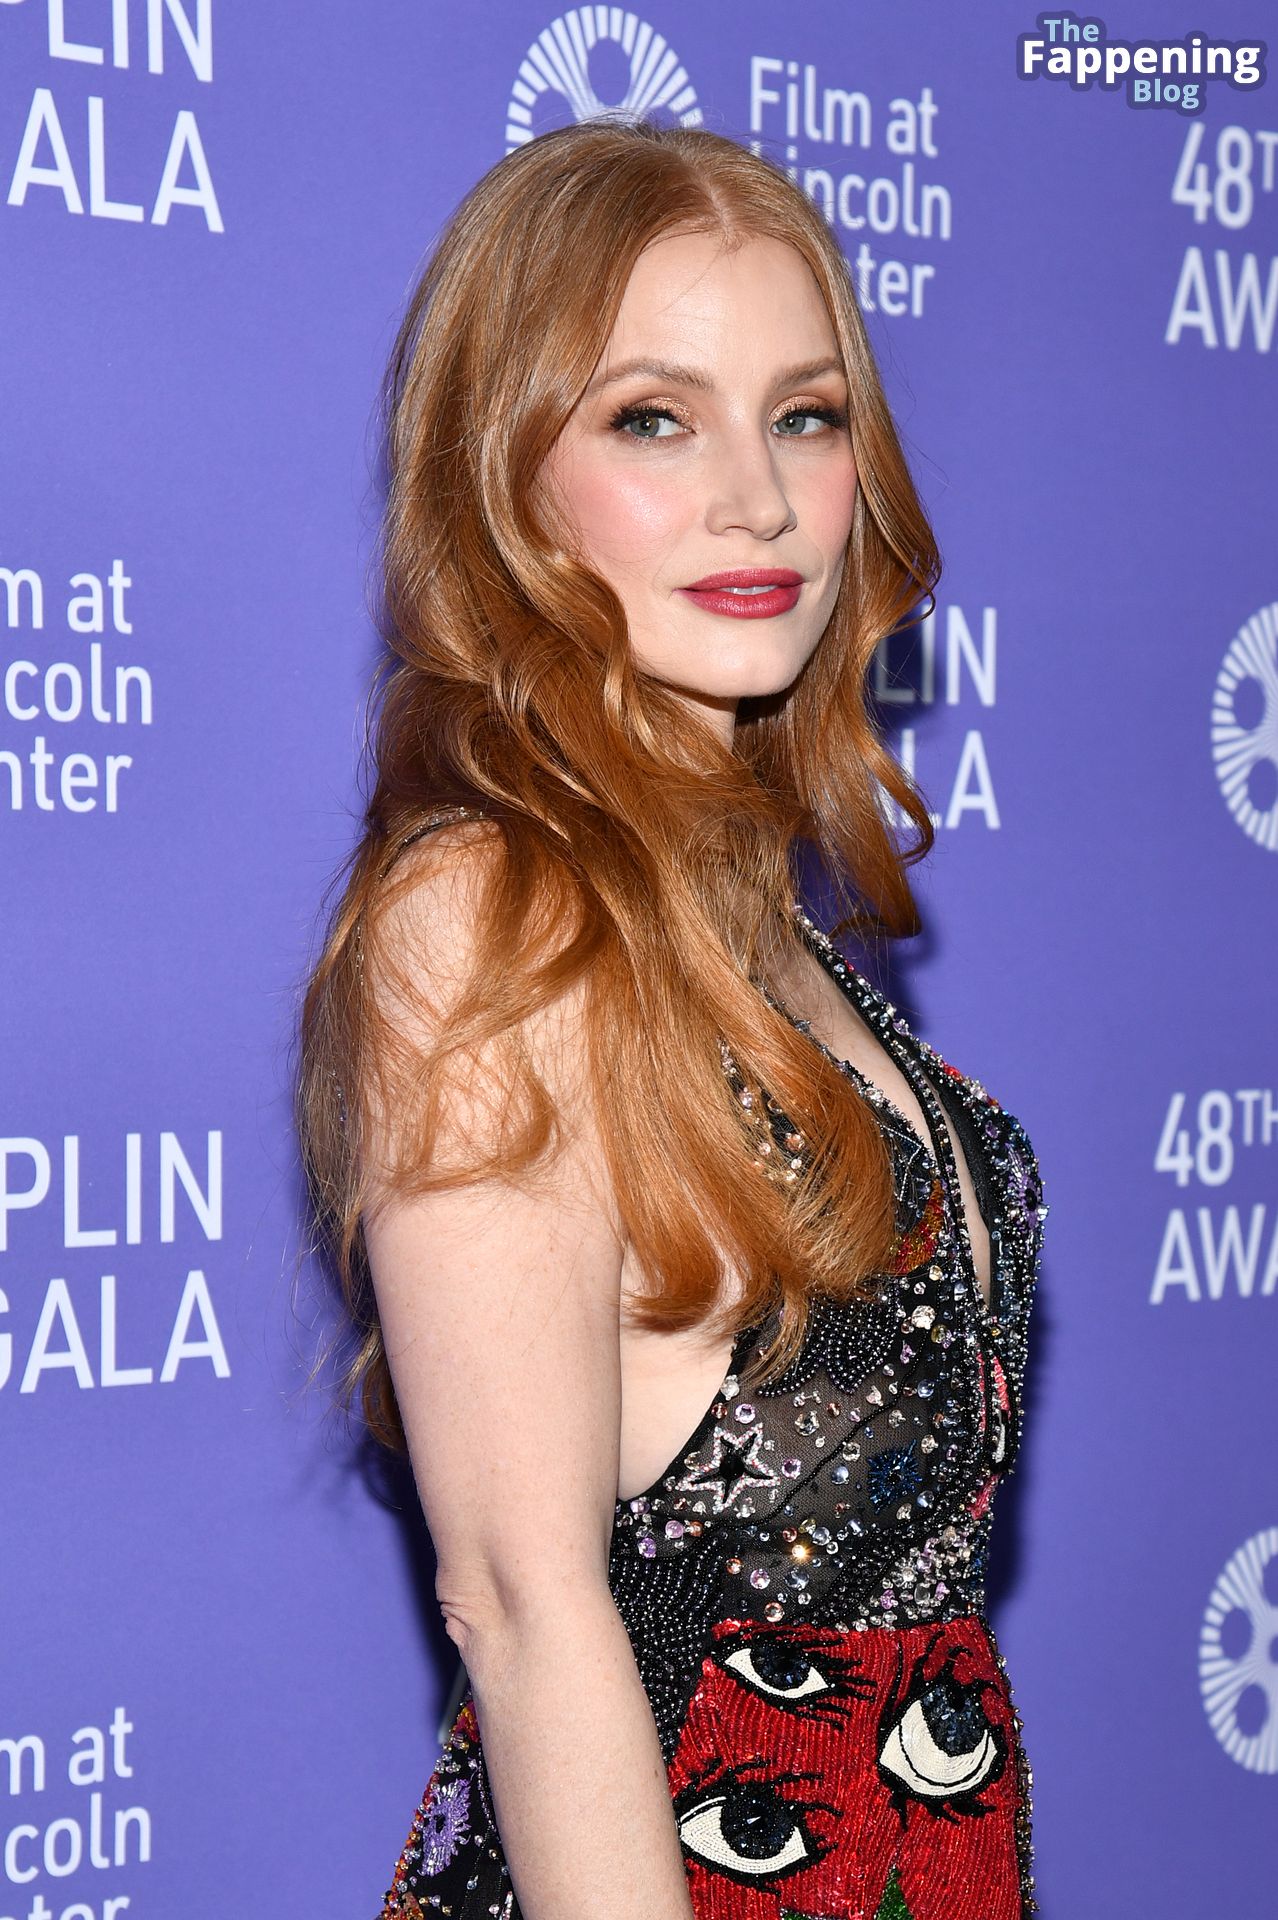 Jessica-Chastain-Sexy-The-Fappening-Blog-87.jpg